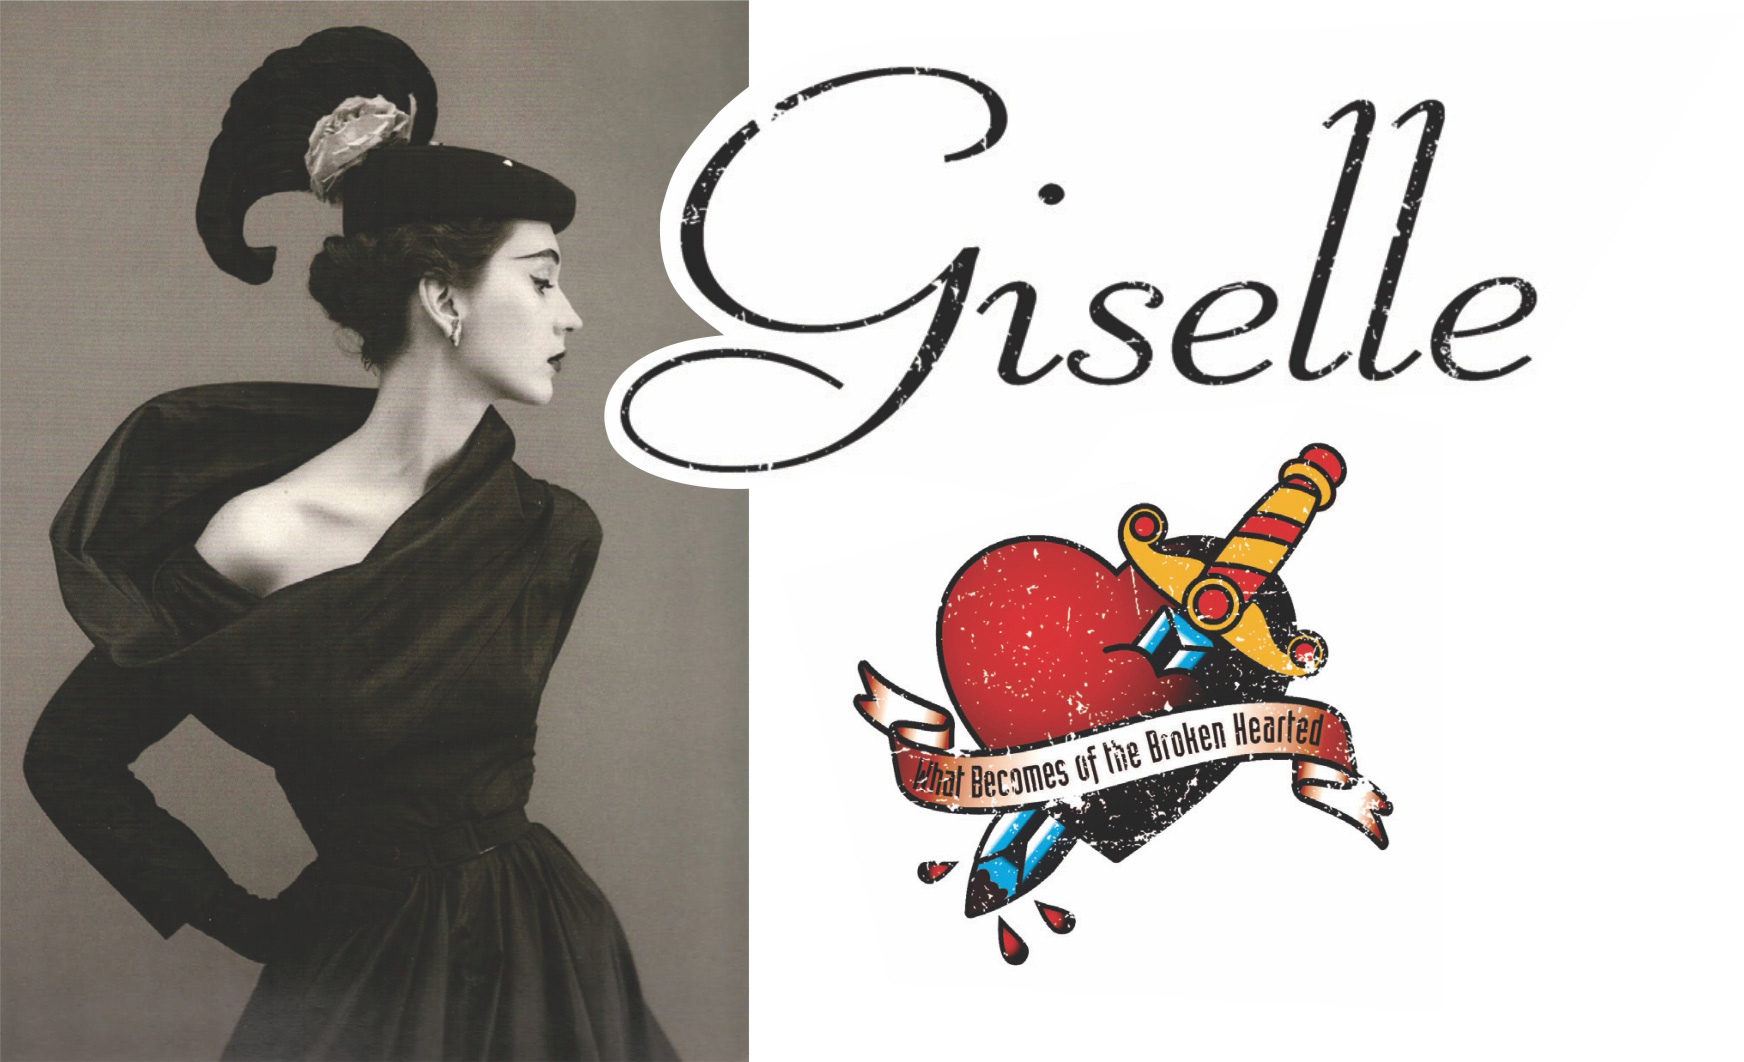 Giselle – What becomes of the broken hearted